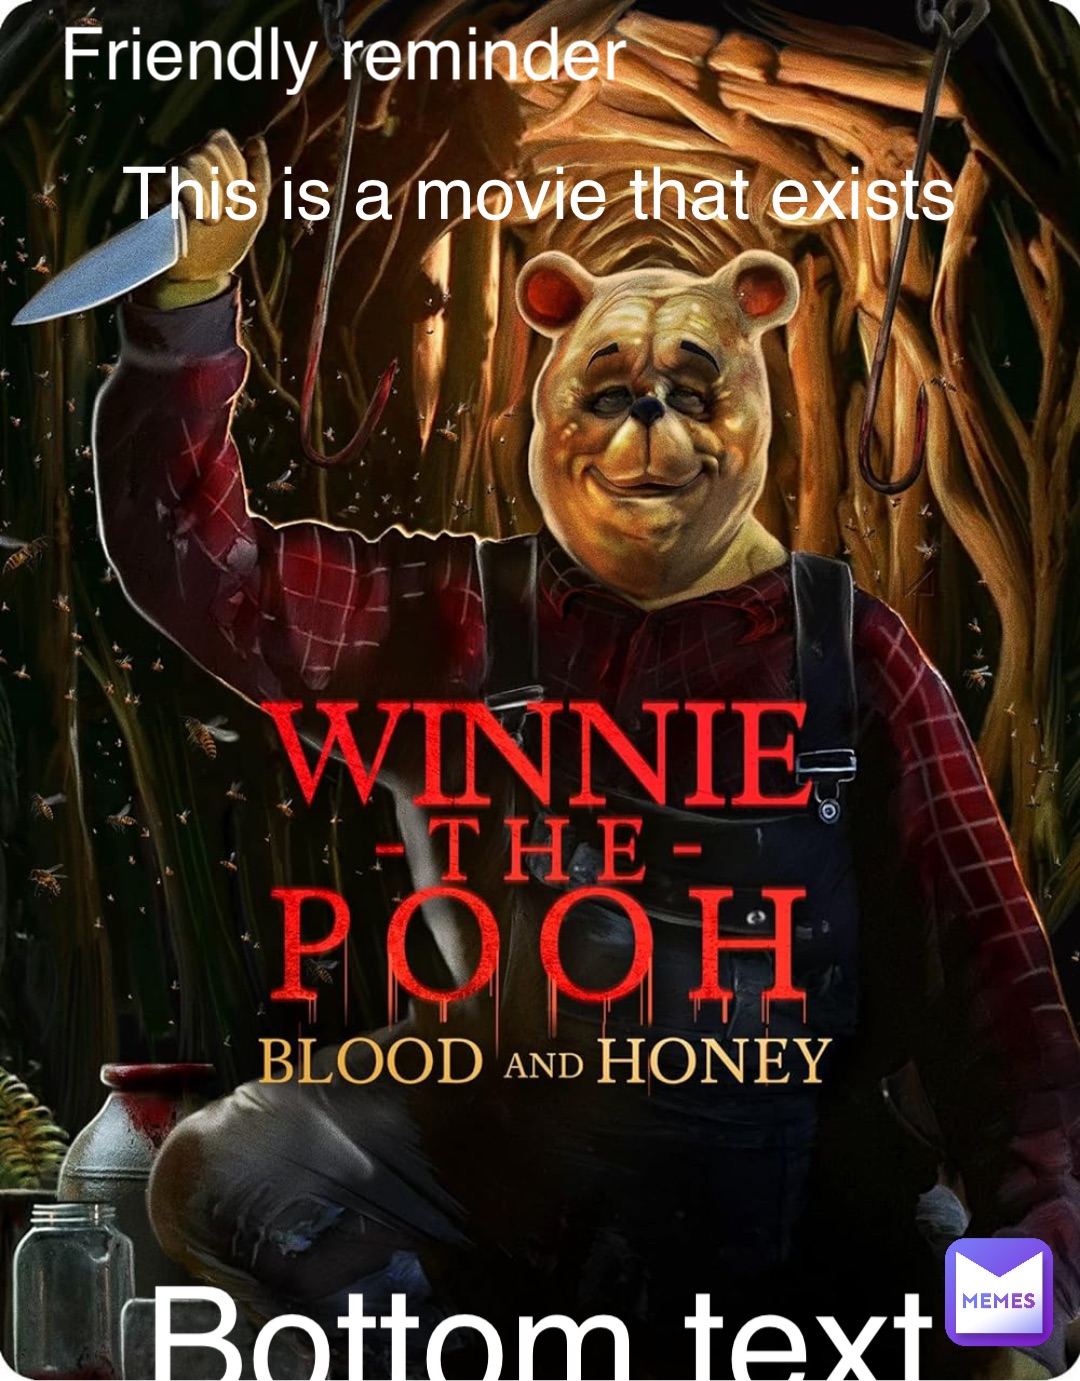 This is a movie that exists Friendly reminder Bottom text